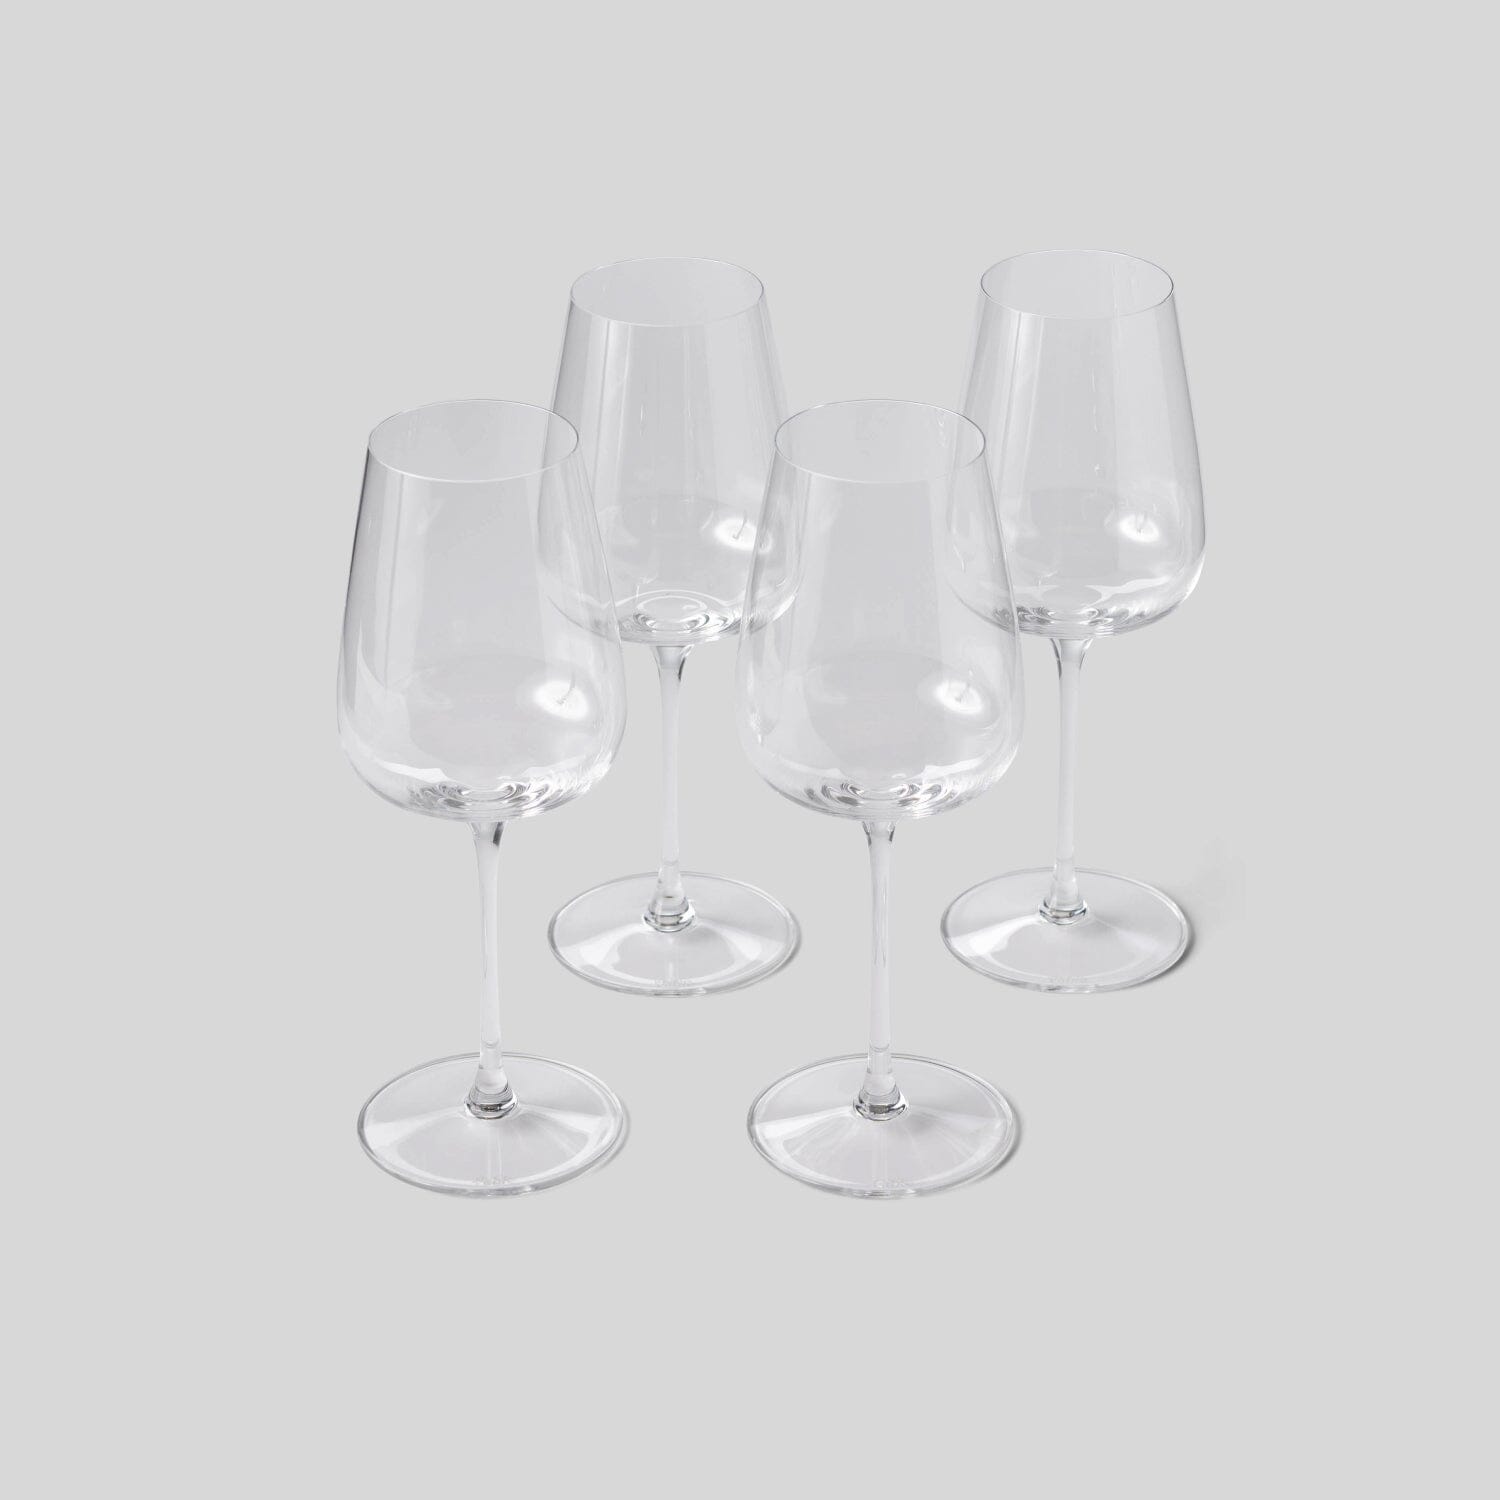 The Wine Glasses Glassware Fable Home #clear